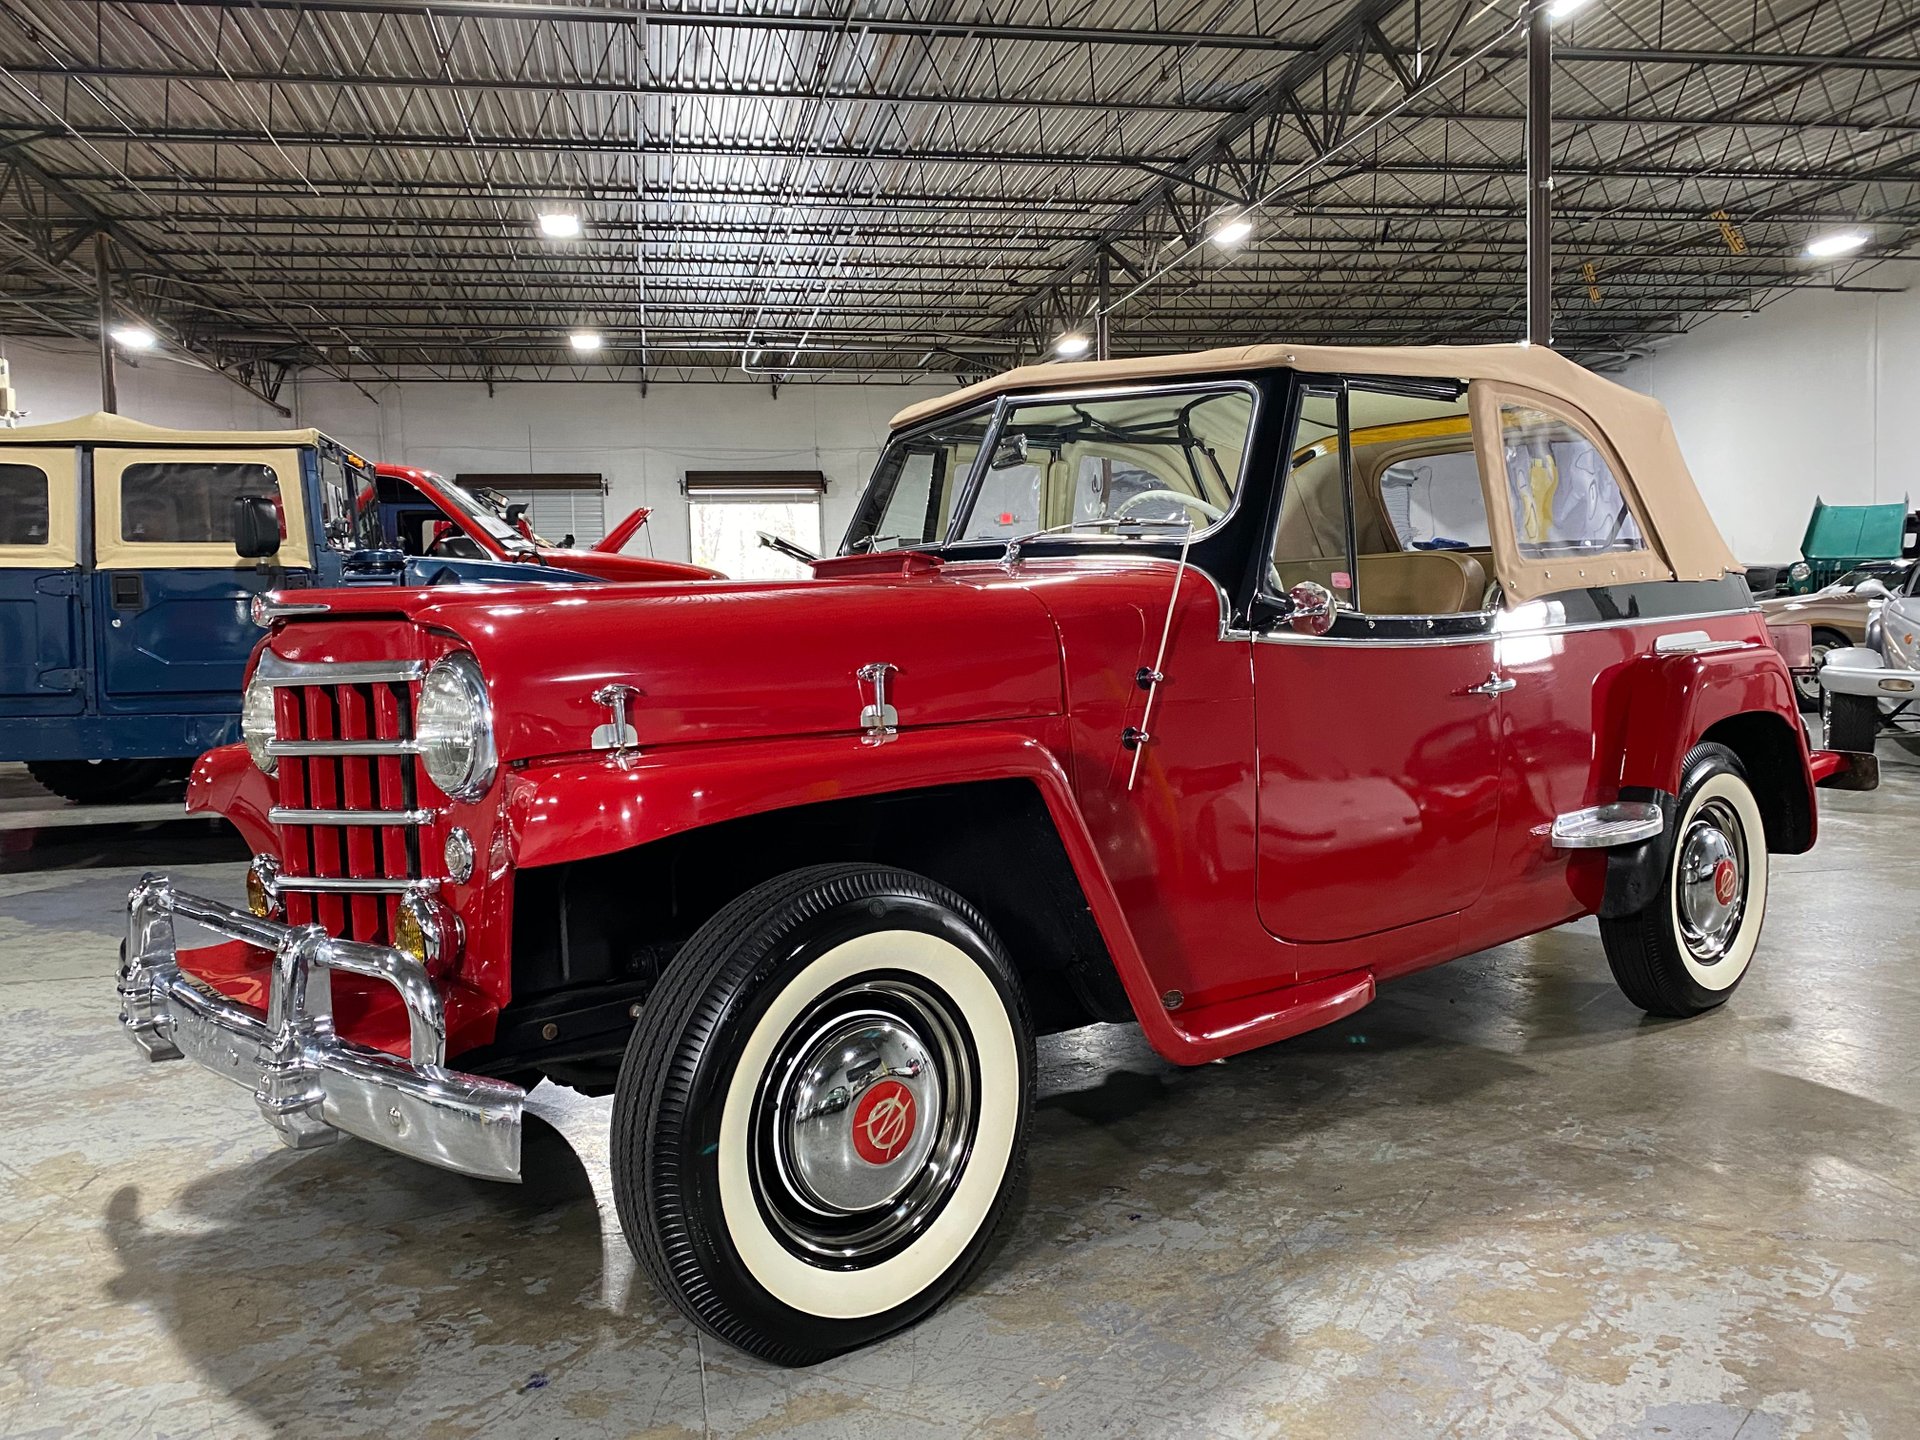 1951 Willys Overland Jeepster